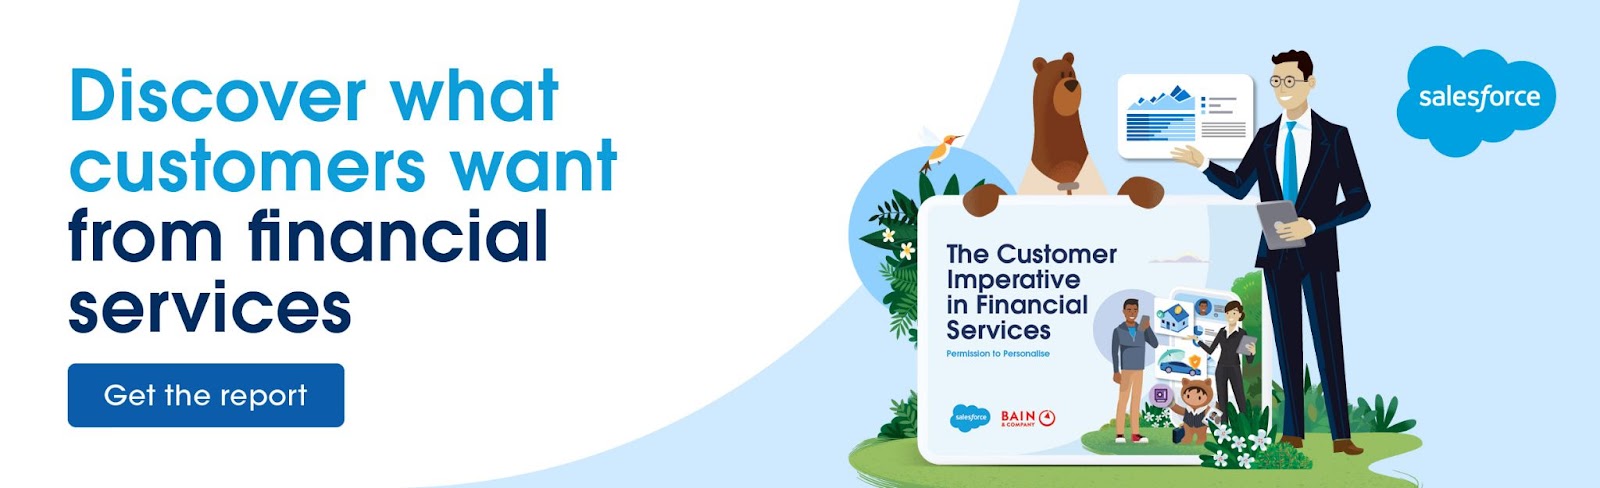 Want more insights on how to thrive in the customer-centric future of financial services? Get your copy of the Customer Imperative in Financial Services report now.